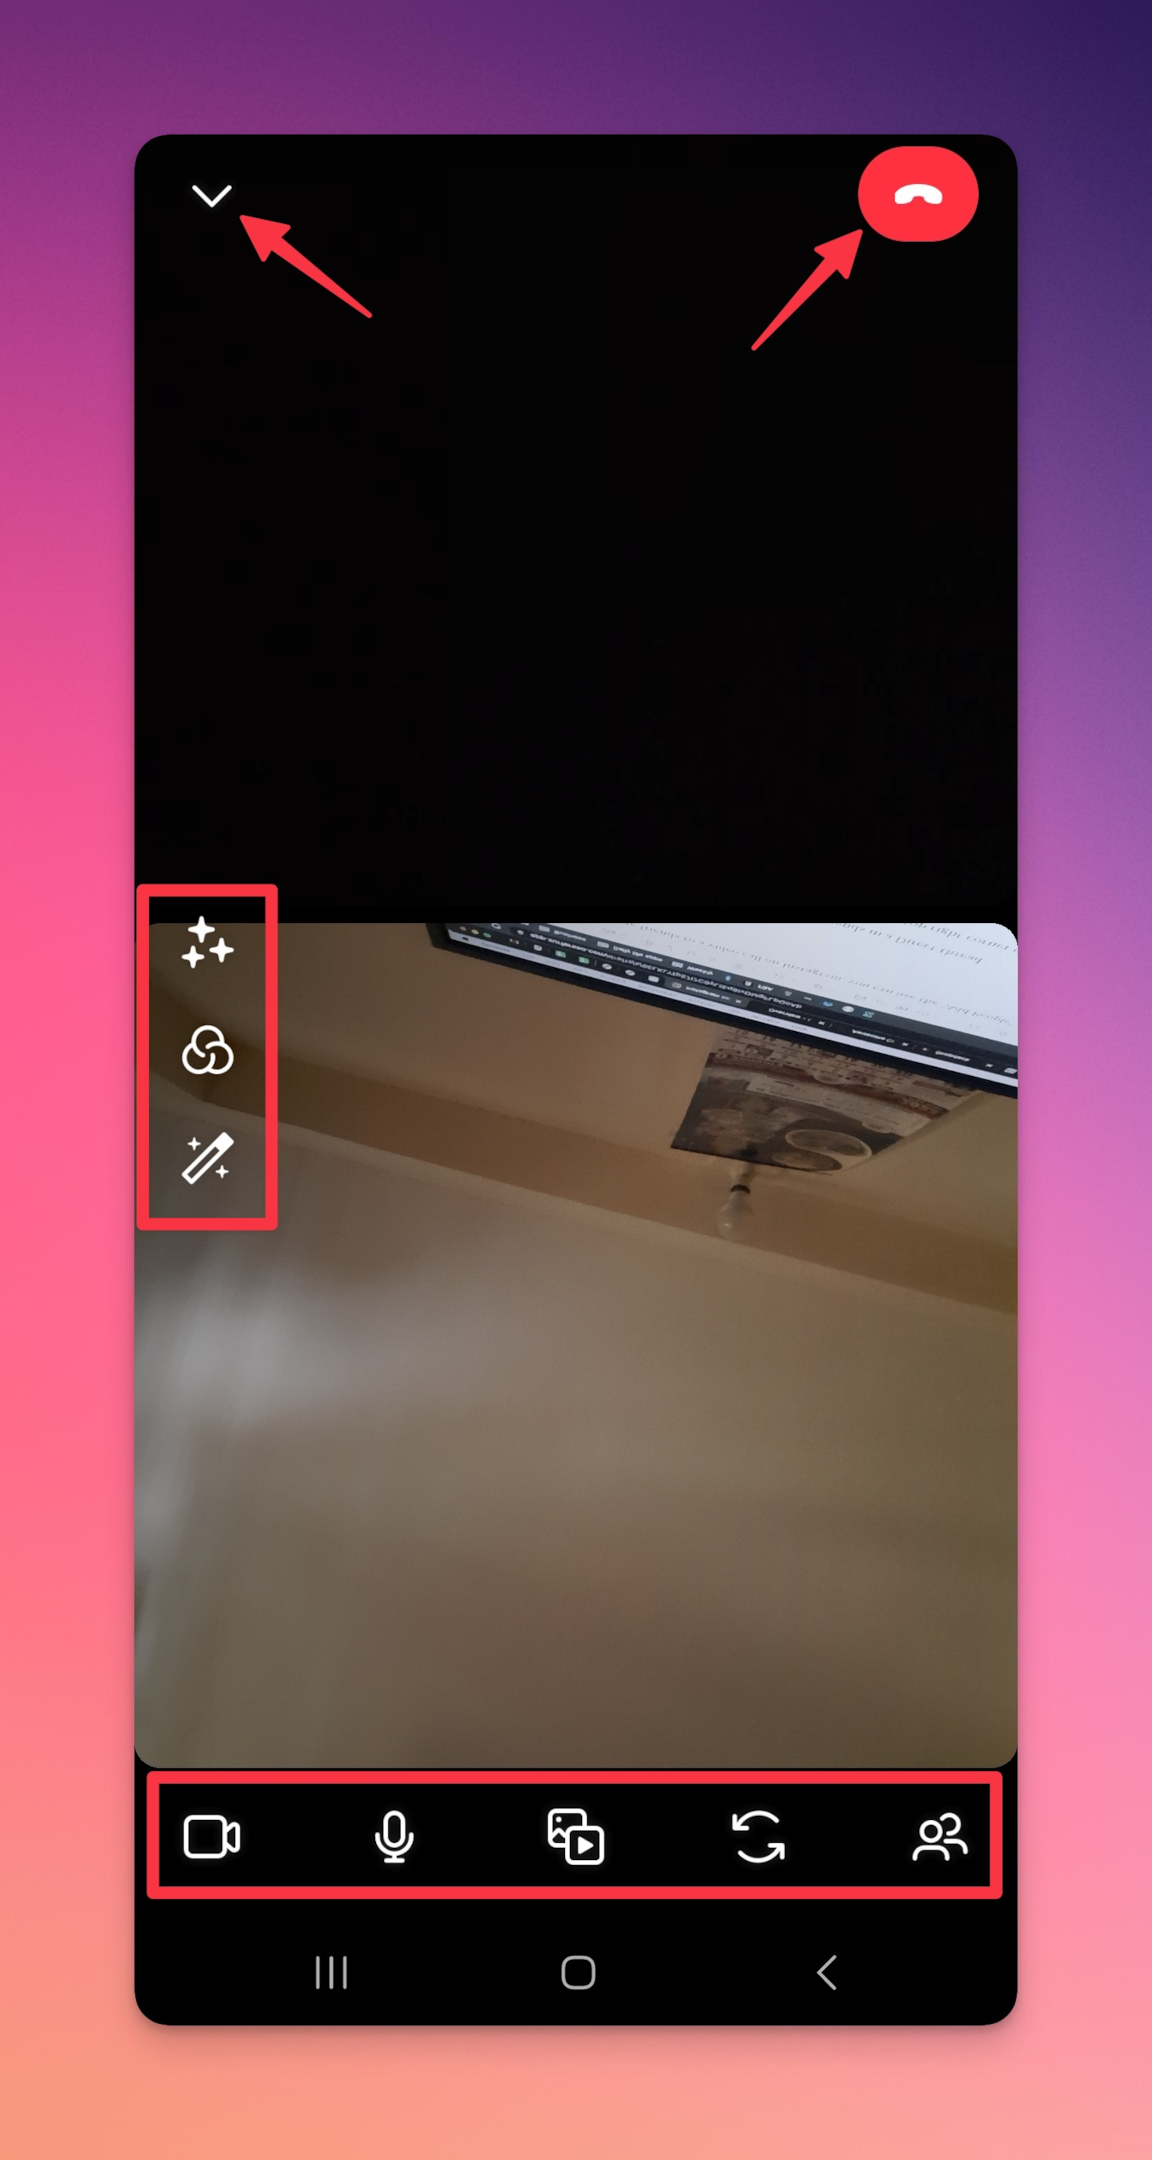 Remote.tools shows to tap on Invite icon (two people) to add people to your video call on Instagram